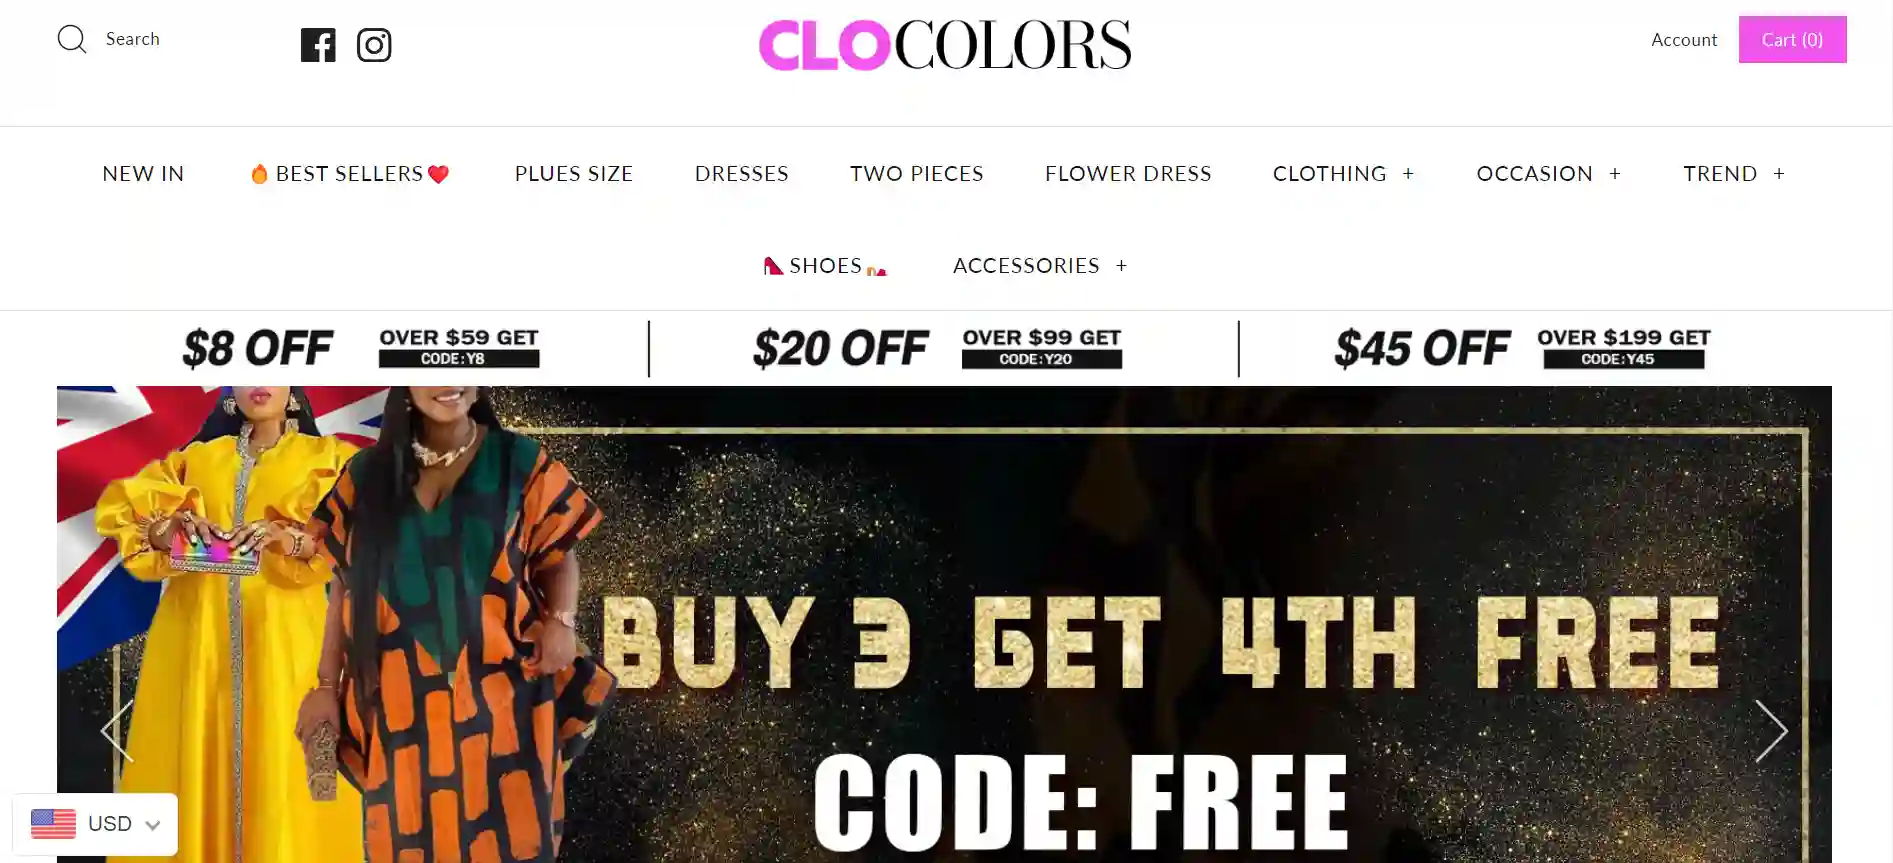 You are currently viewing Clocolors Clothing Reviews: Worth the Hype or Just Another Scam?